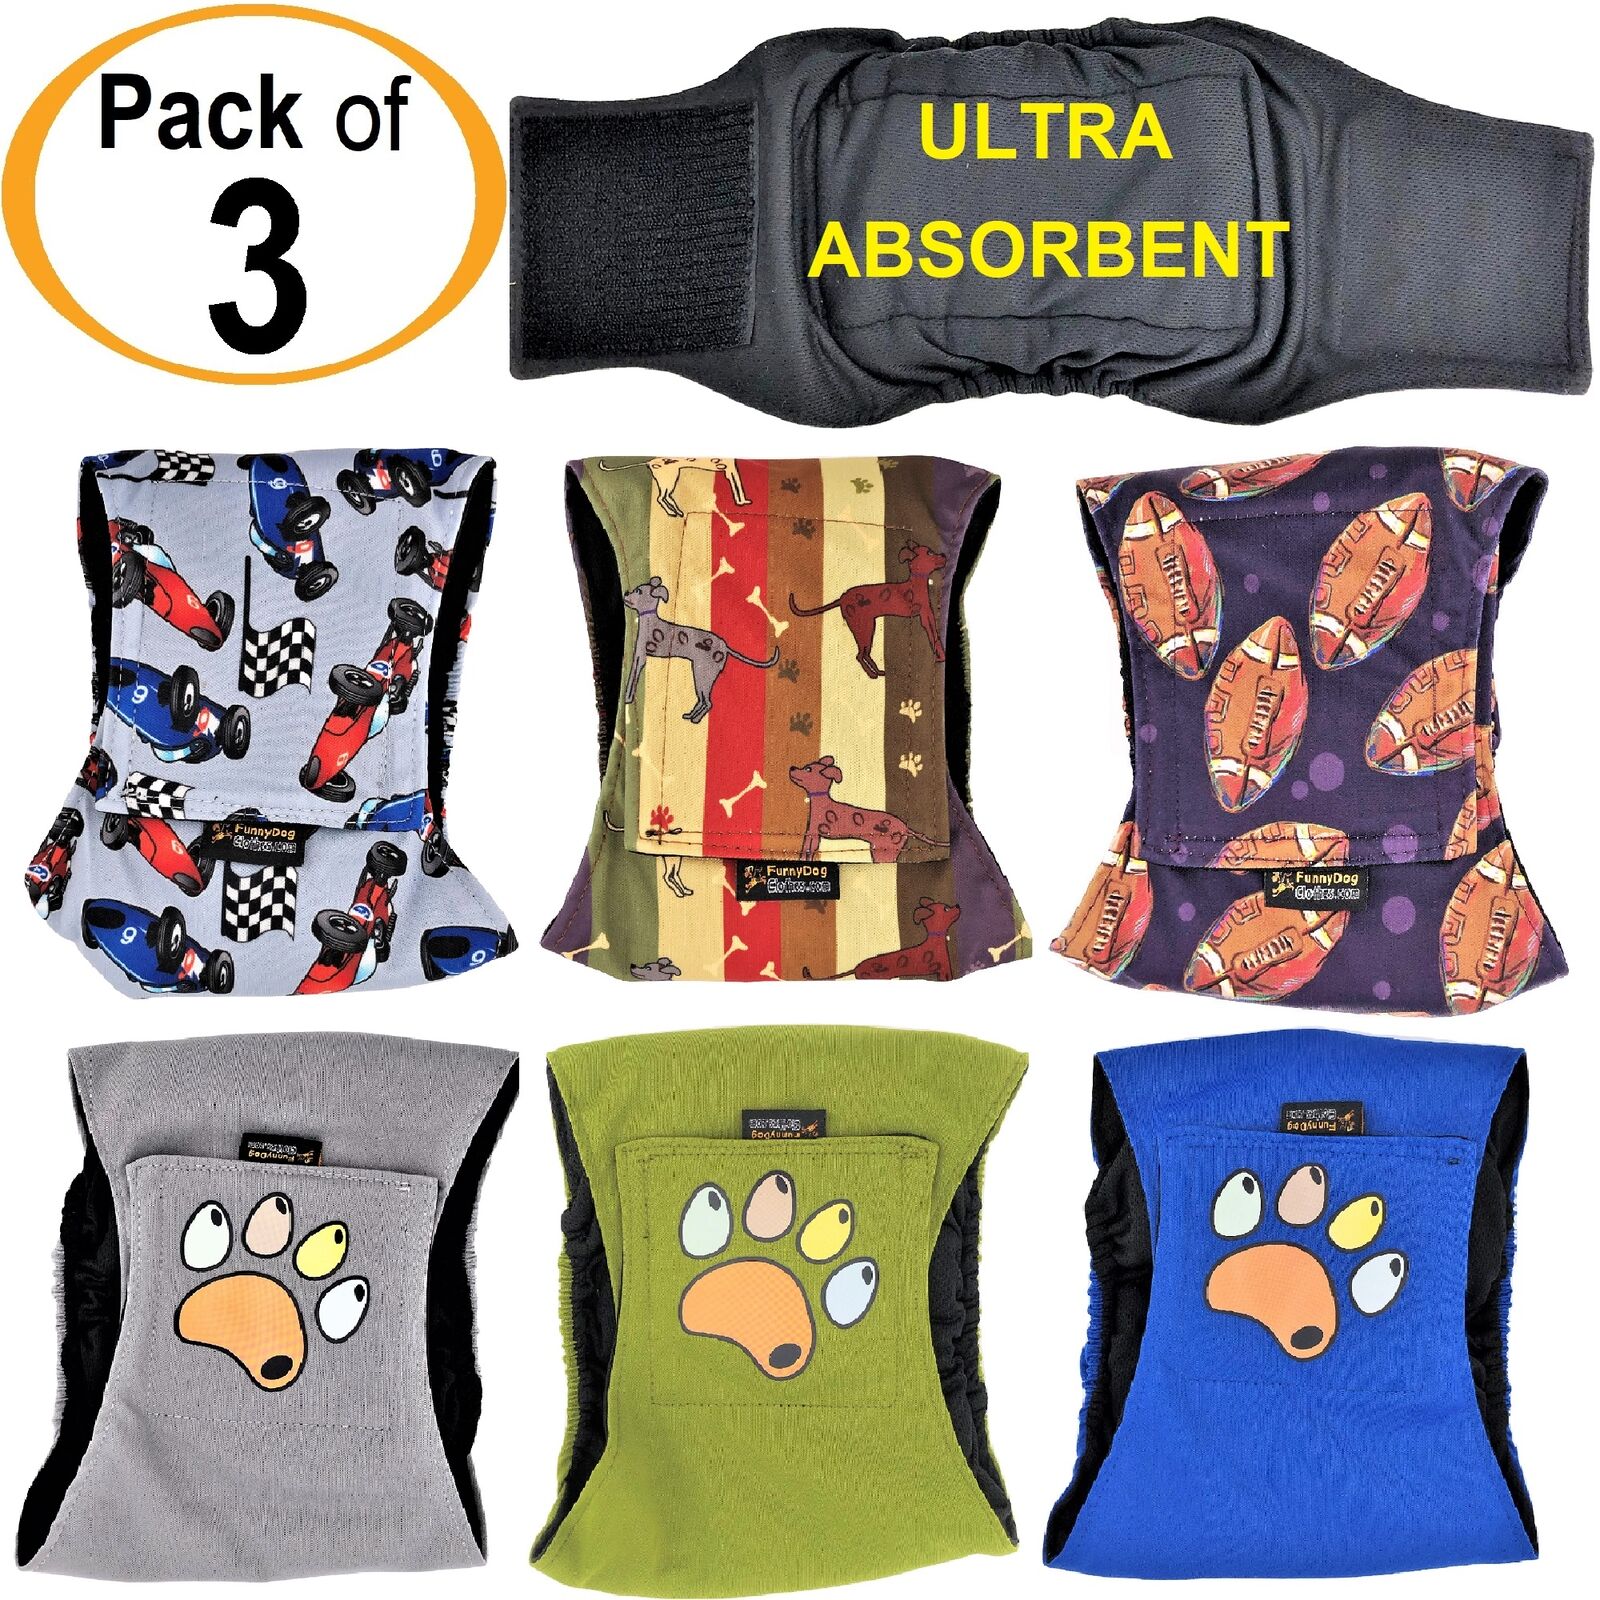 PACK of 3 Dog Diapers Male Belly Band Wrap LEAK PROOF Washable ULTRA ABSORBENT FDC®